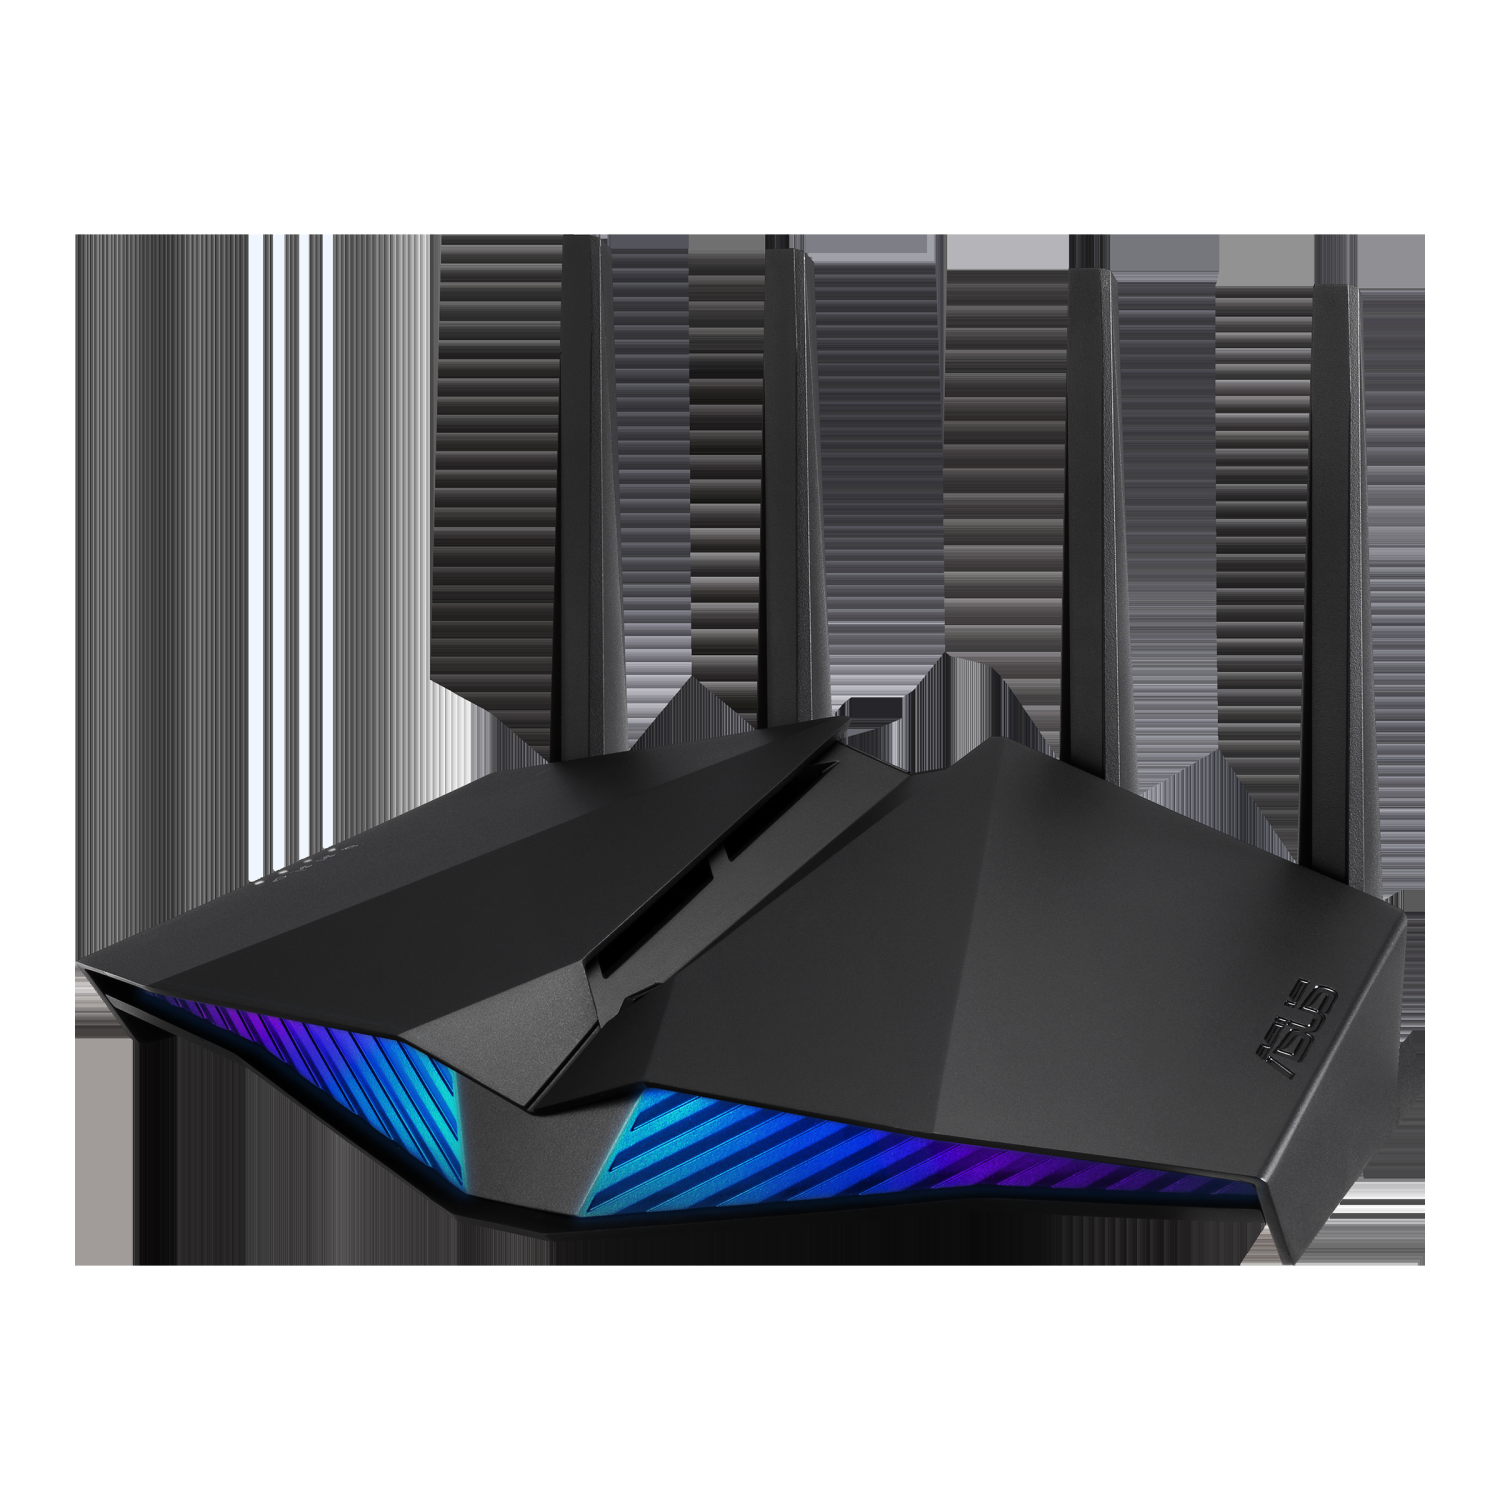 ASUS 6-Stream Wireless AX5400 Dual-Band Wi-Fi 6 Gaming Router (RT-AX82U)